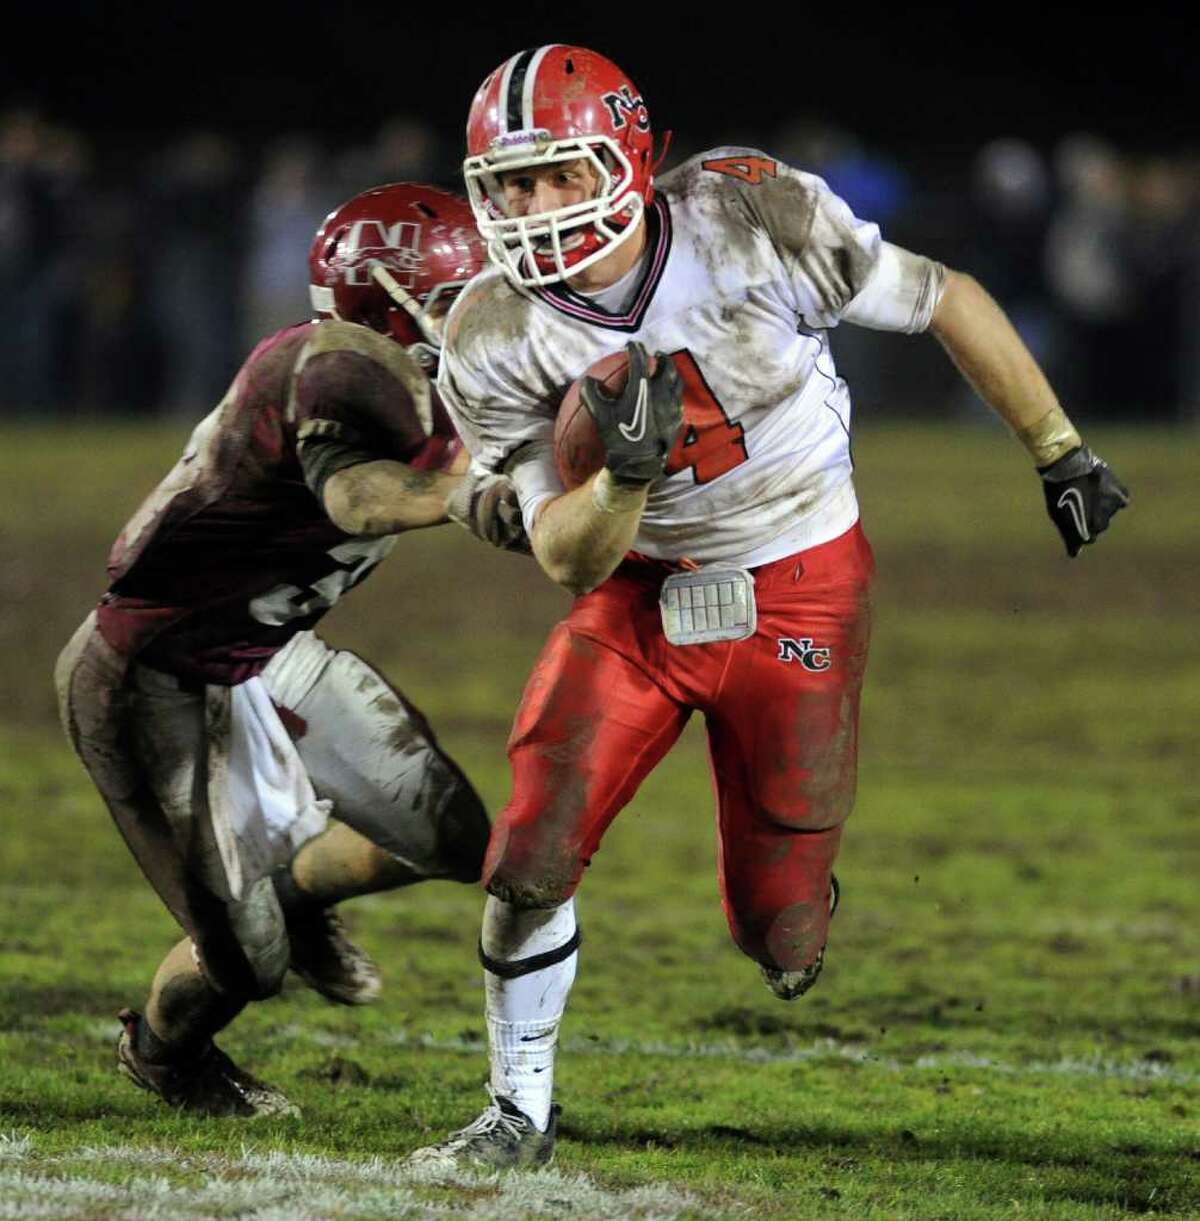 Kevein Macan of New Canaan carries the ball during Tuesday's Class L quarterfinal game at Naugatuck High School on November 30, 2010.